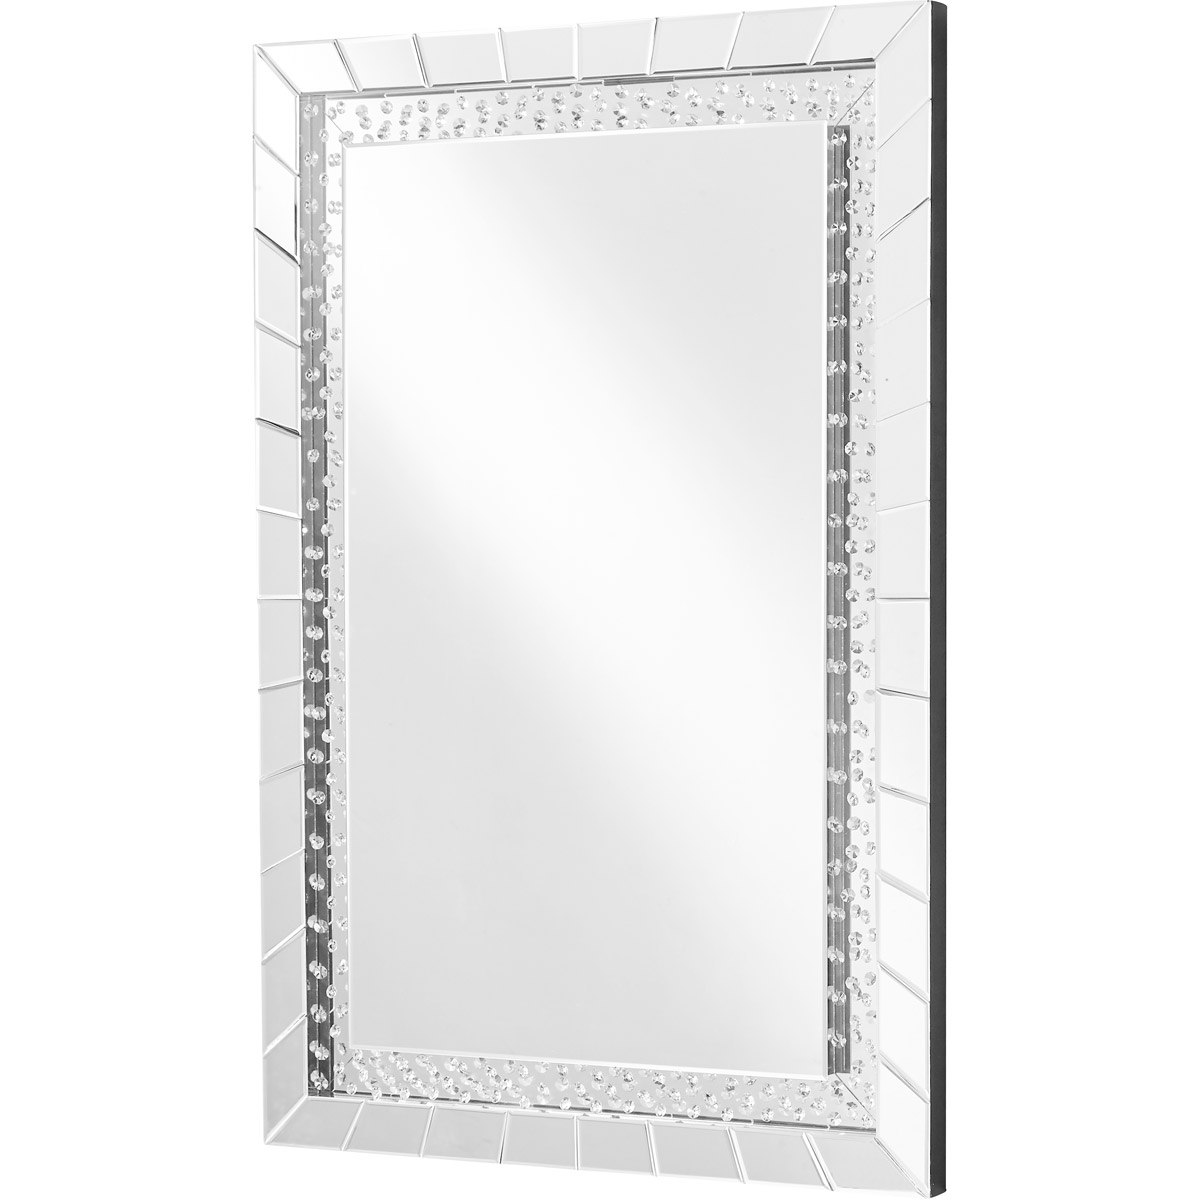 Mr9103 Sparkle 47 In. Contemporary Crystal Rectangle Mirror, Clear